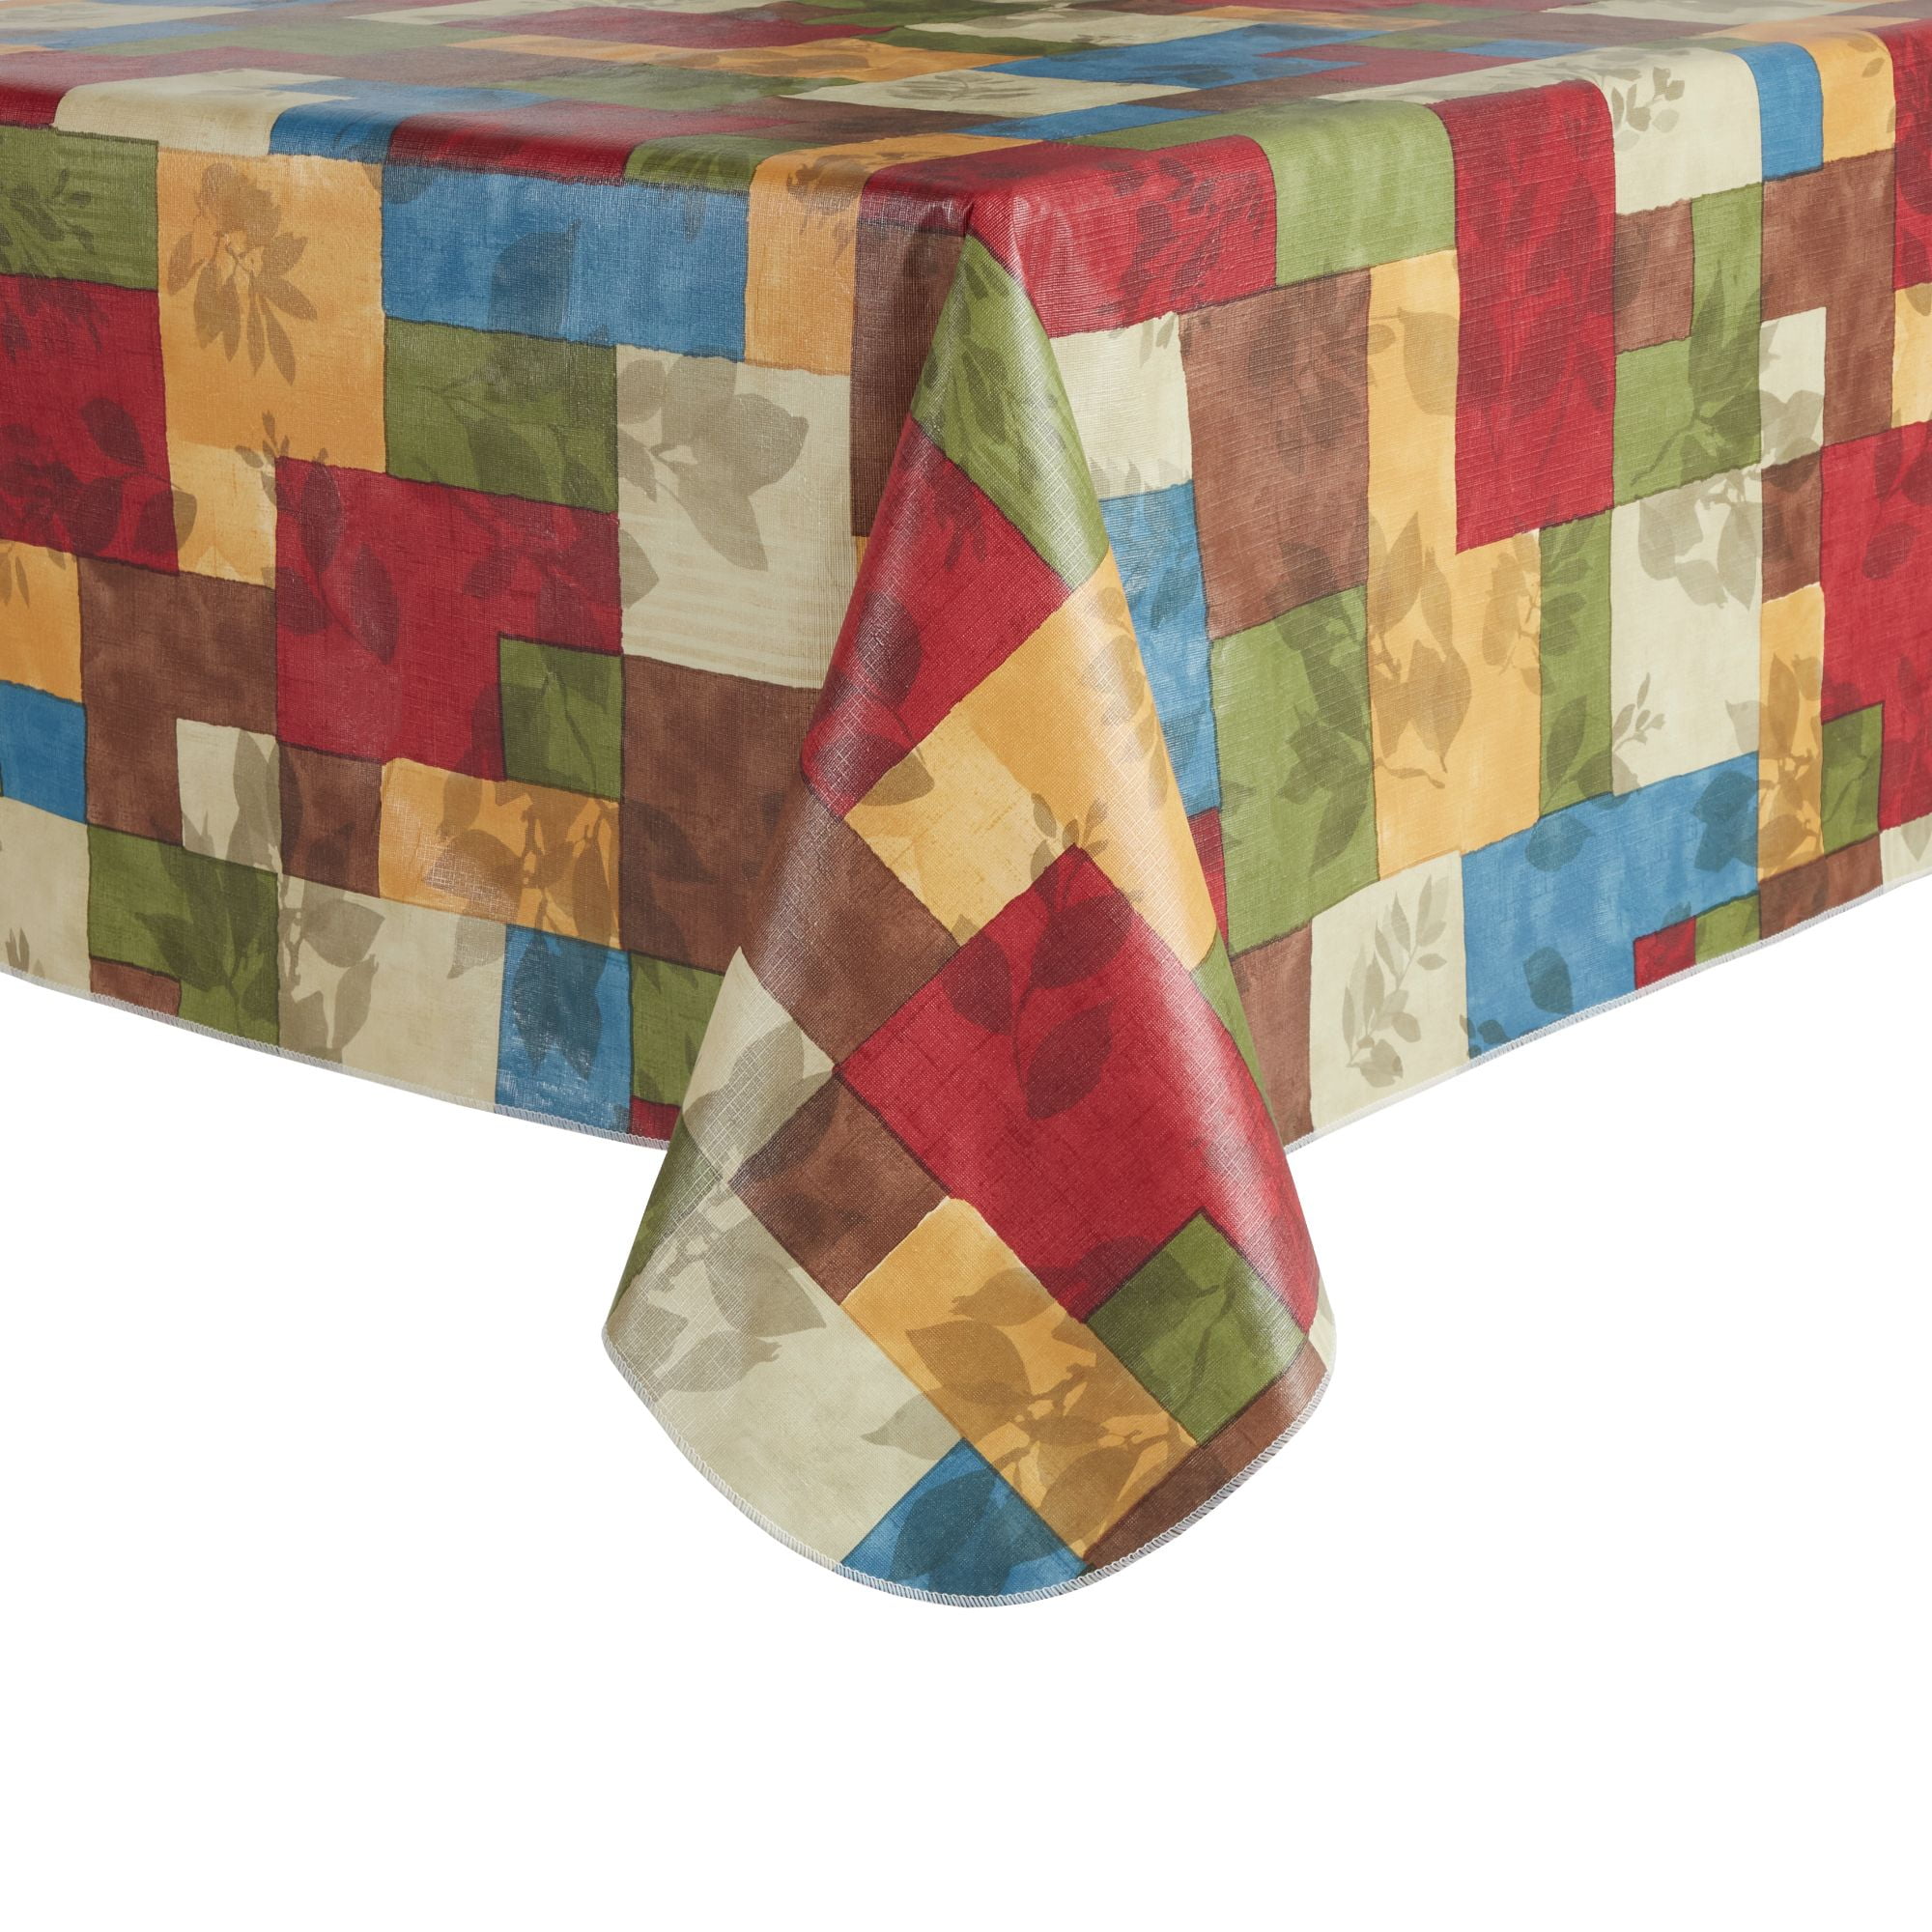 Mainstays Cortana PEVA Tablecloth, Multi, 60"W x 84"L Rectangle, Available in various sizes